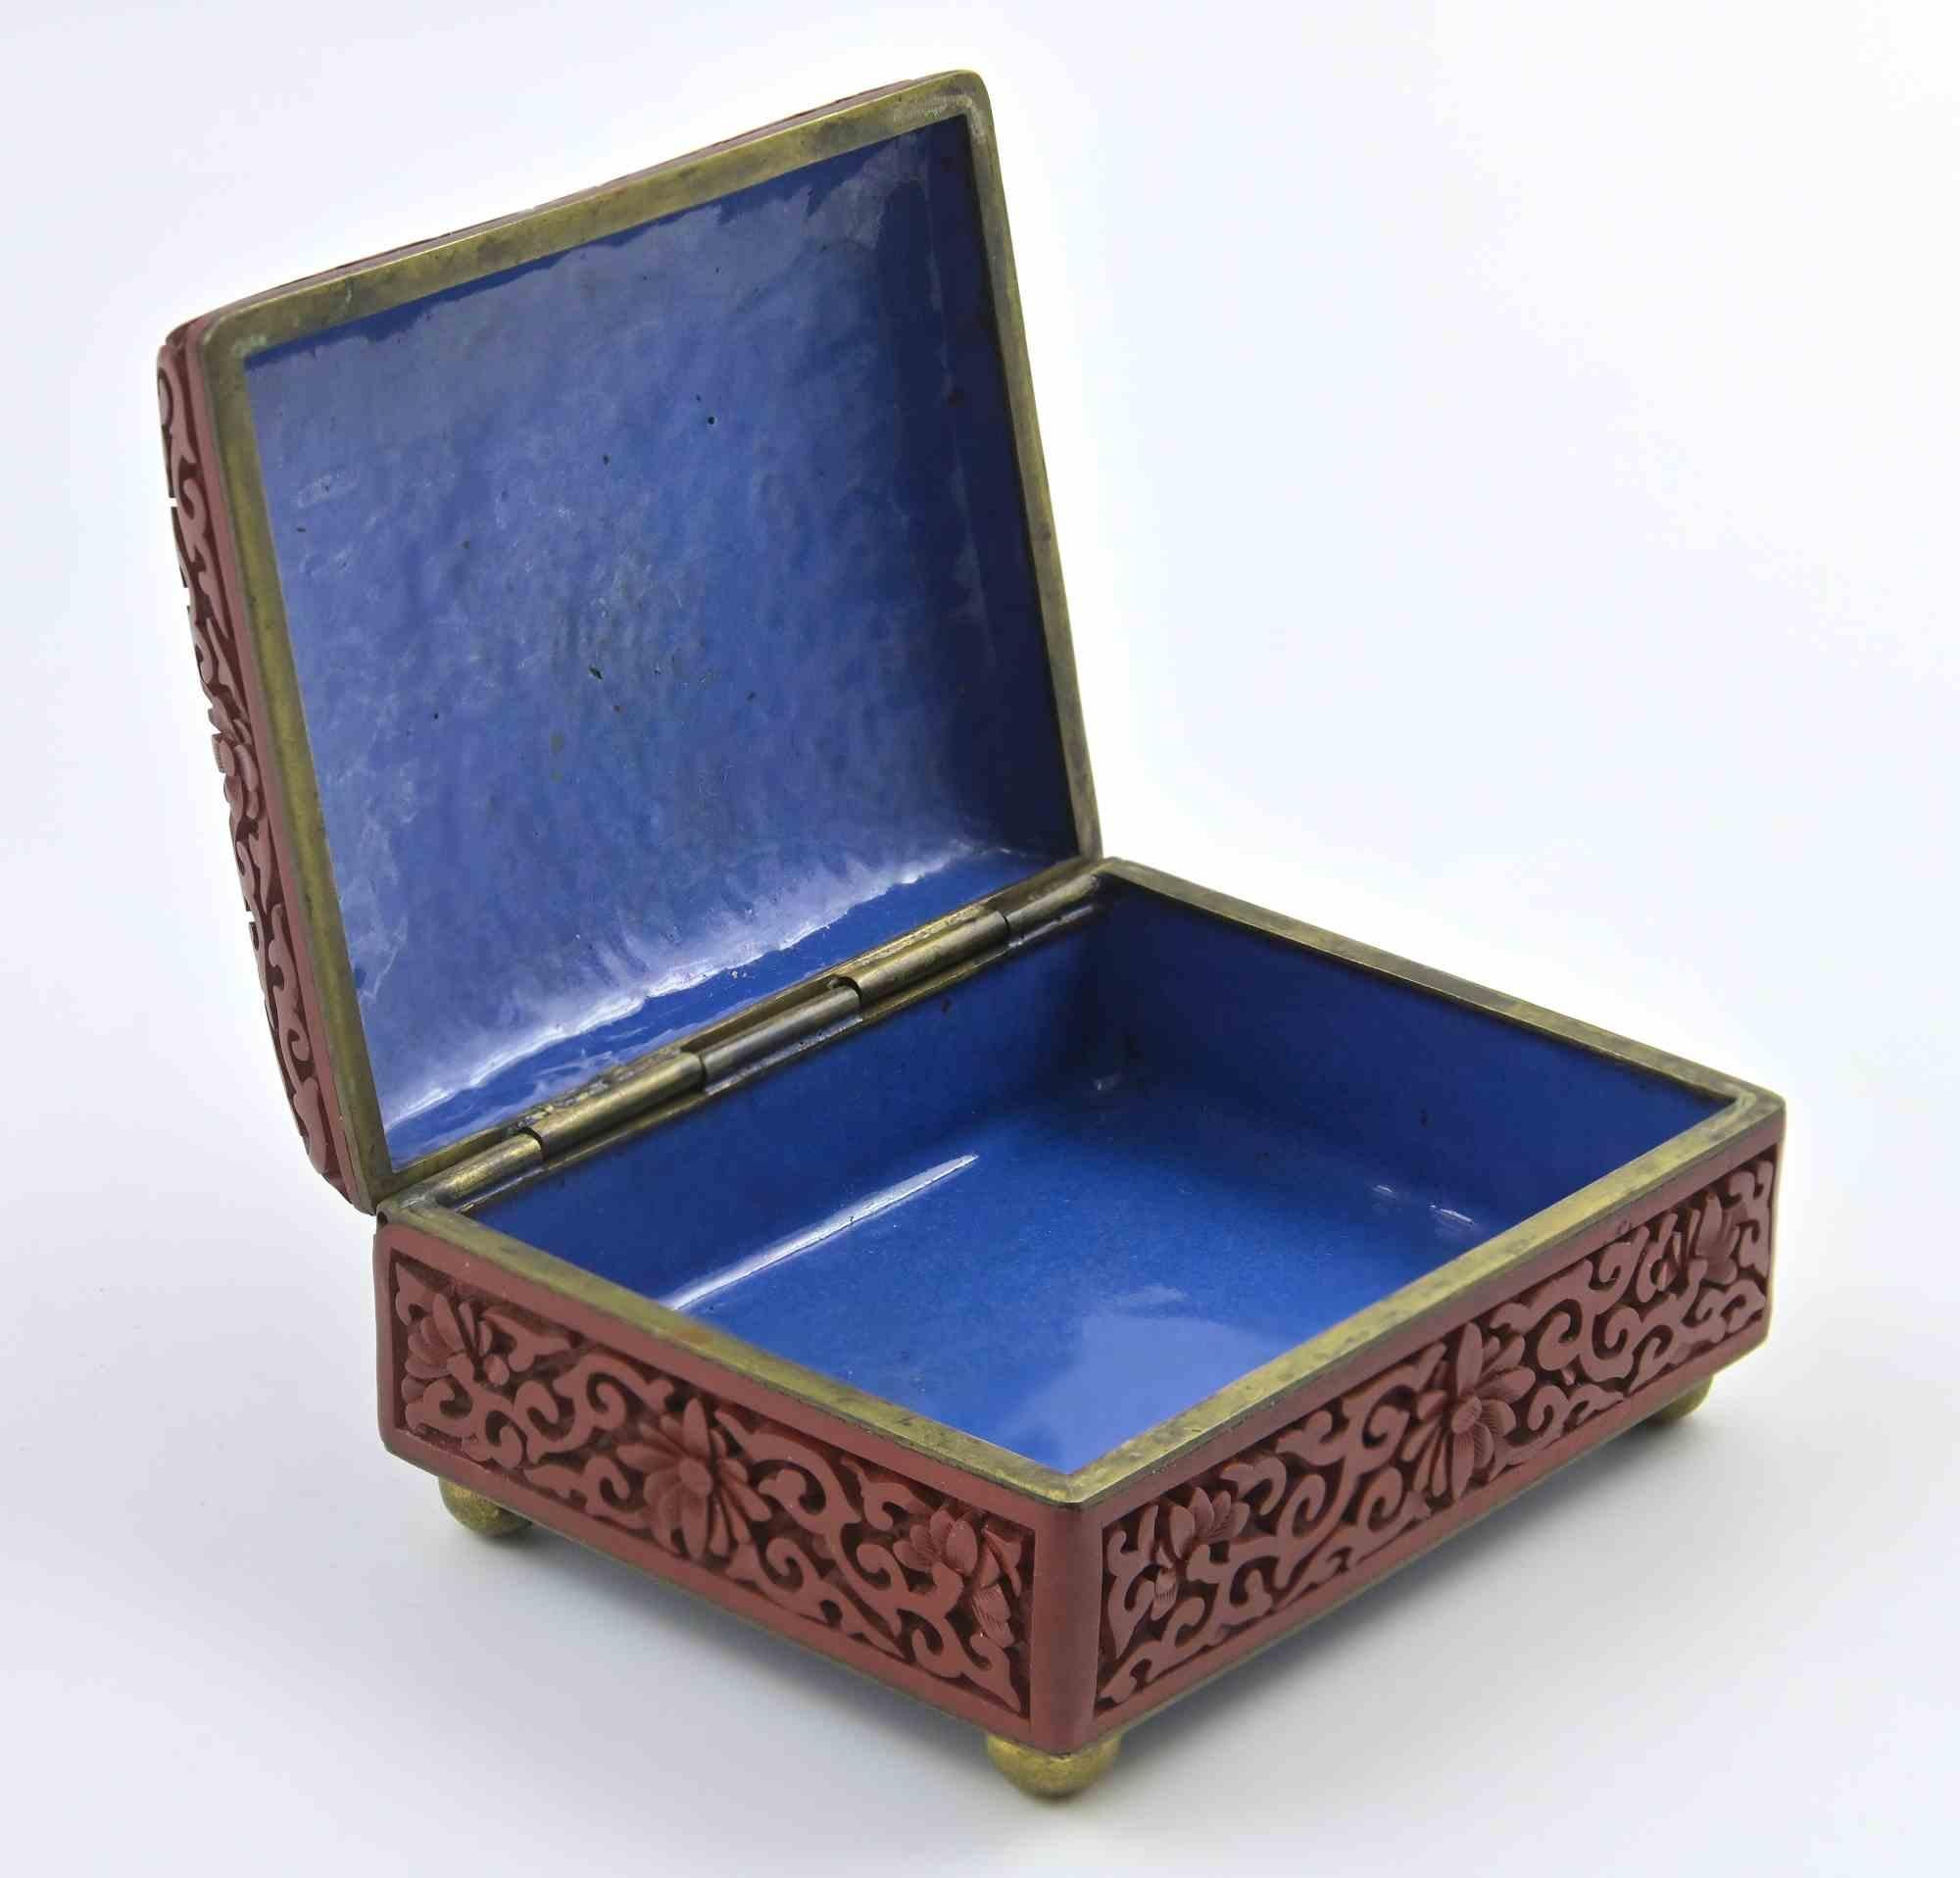 Vintage Chinese box in sealing wax.

China Mid-20th Century.

4x10x8 cm.

Good conditions.